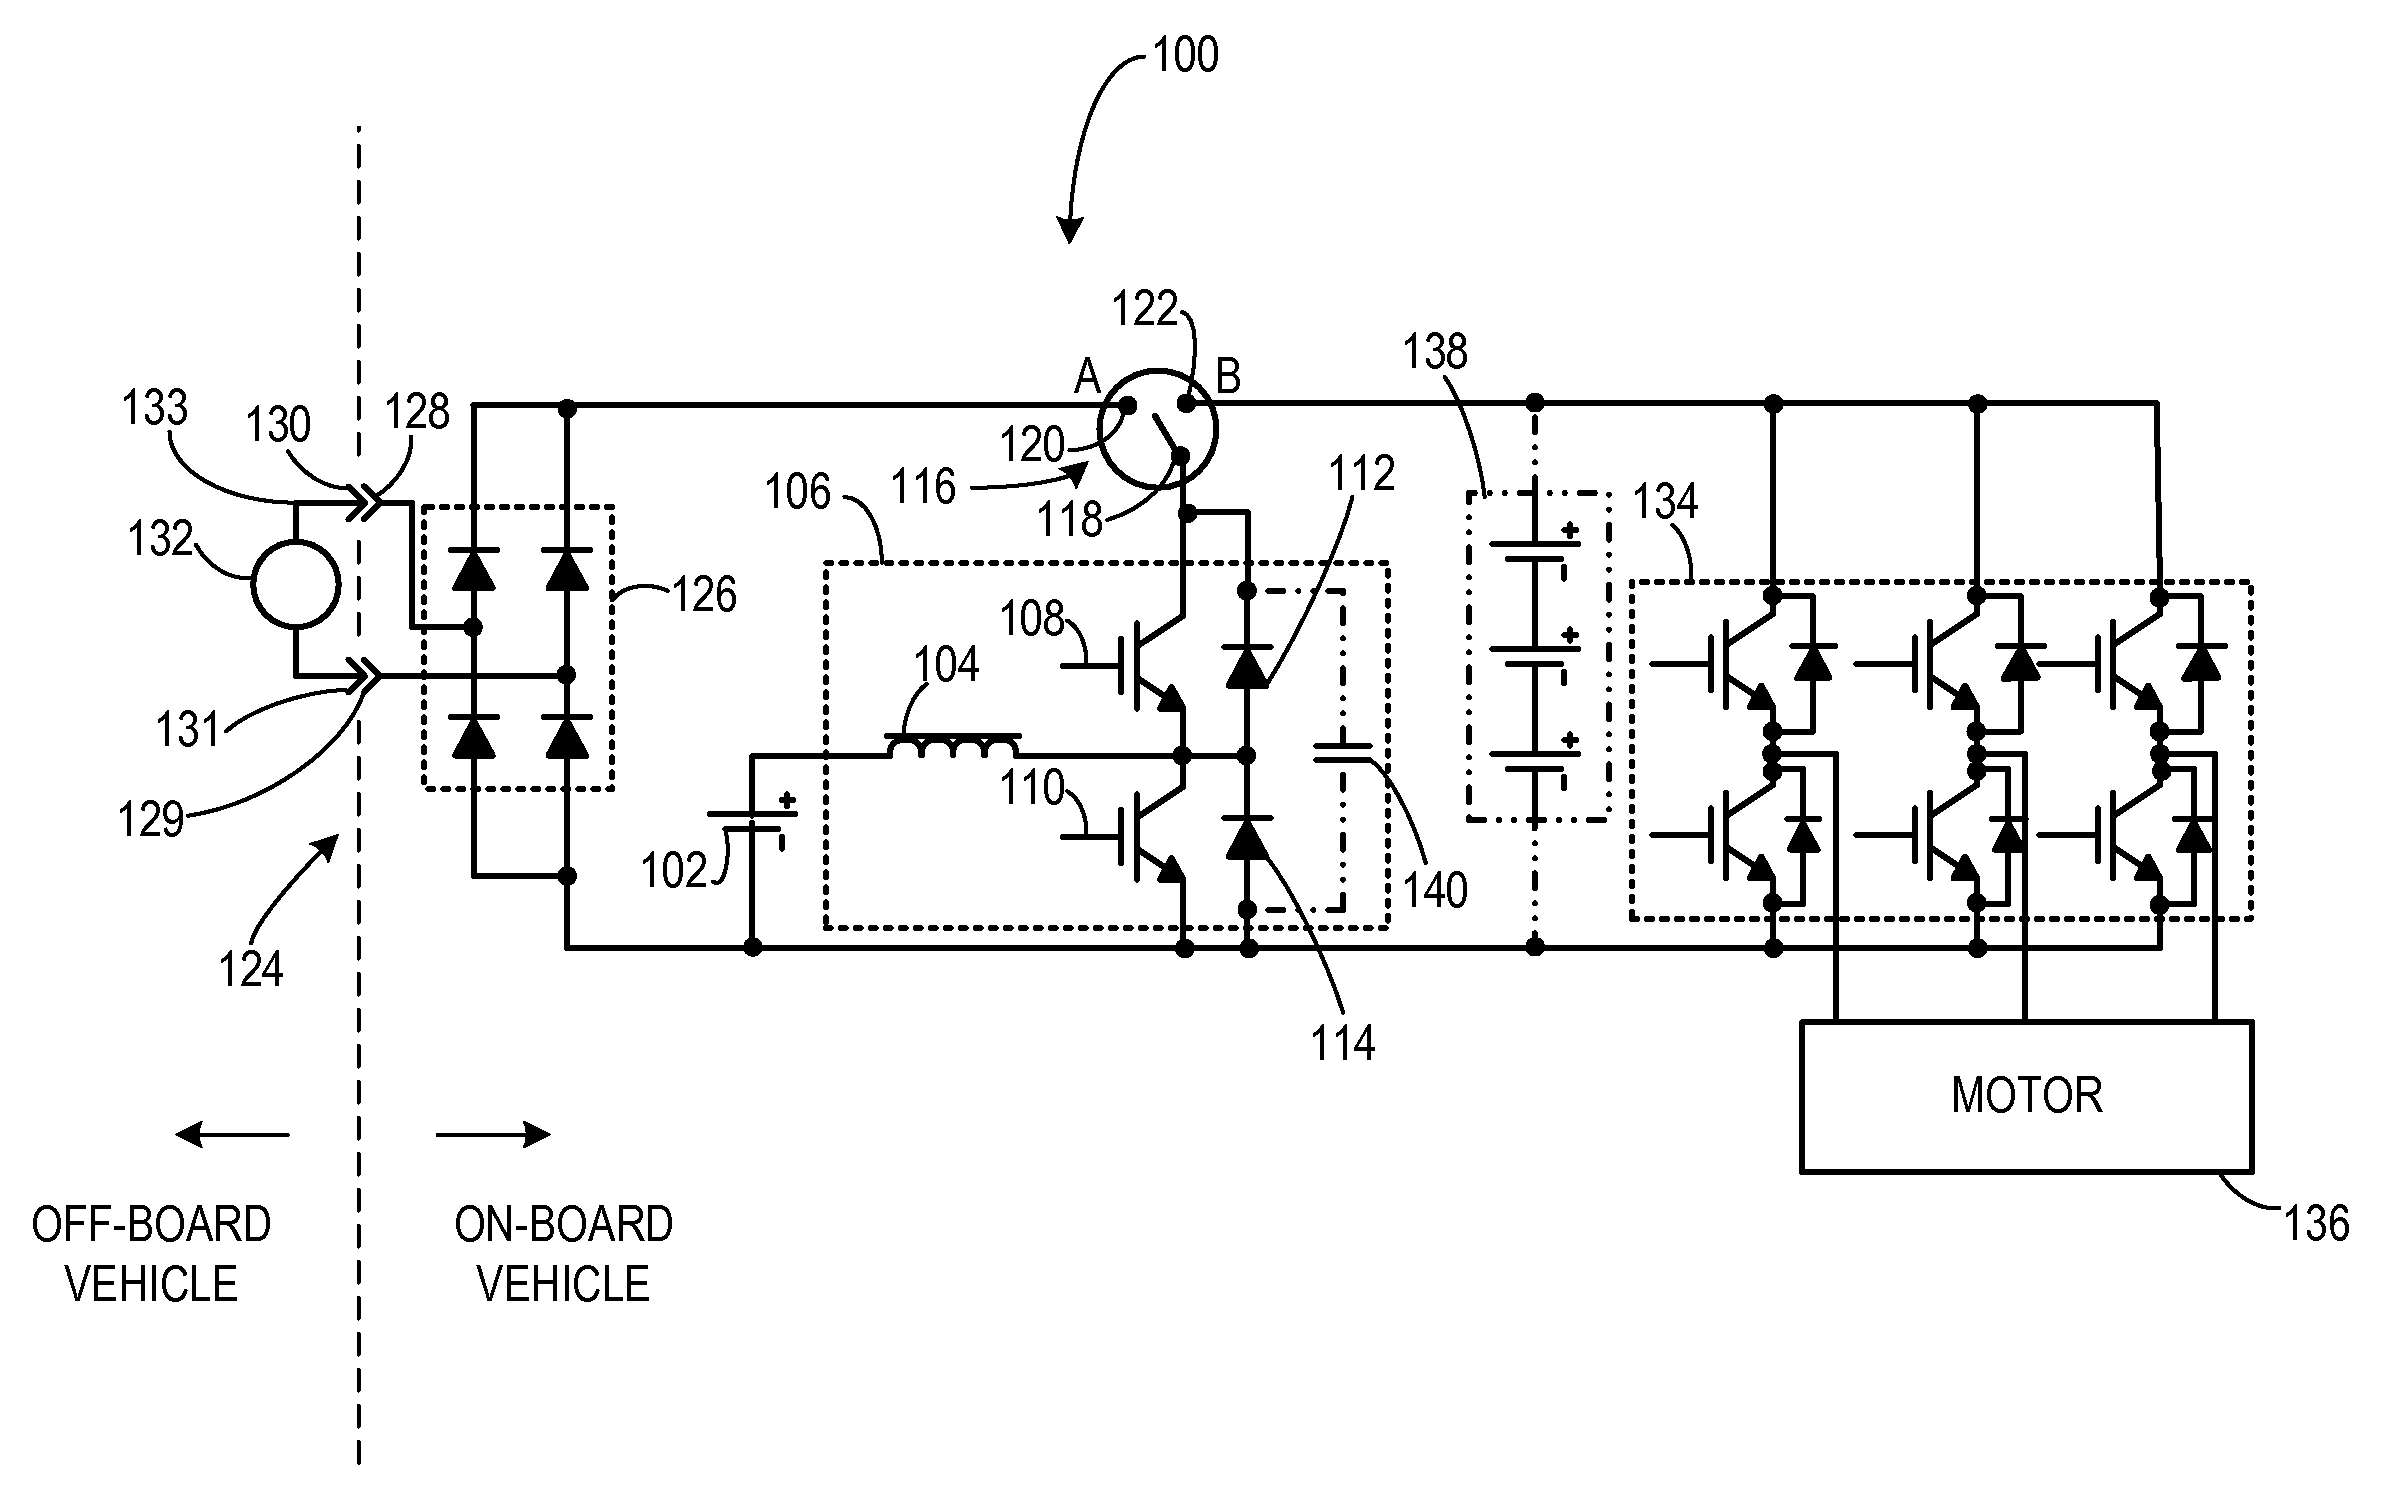 Apparatus for energy transfer using converter and method of manufacturing same